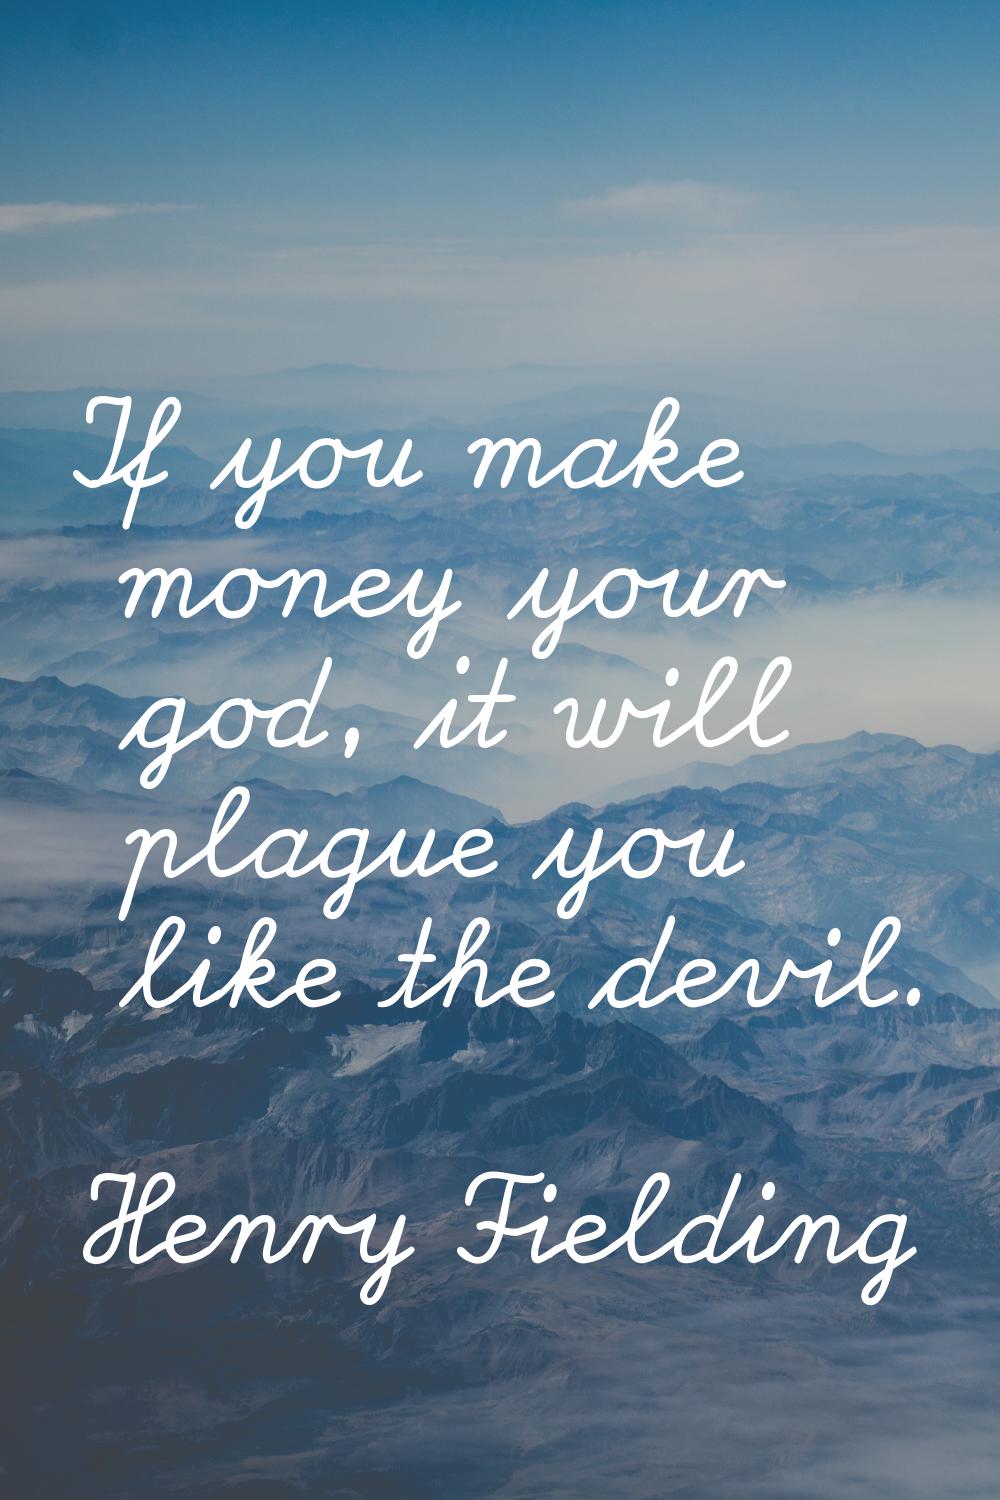 If you make money your god, it will plague you like the devil.